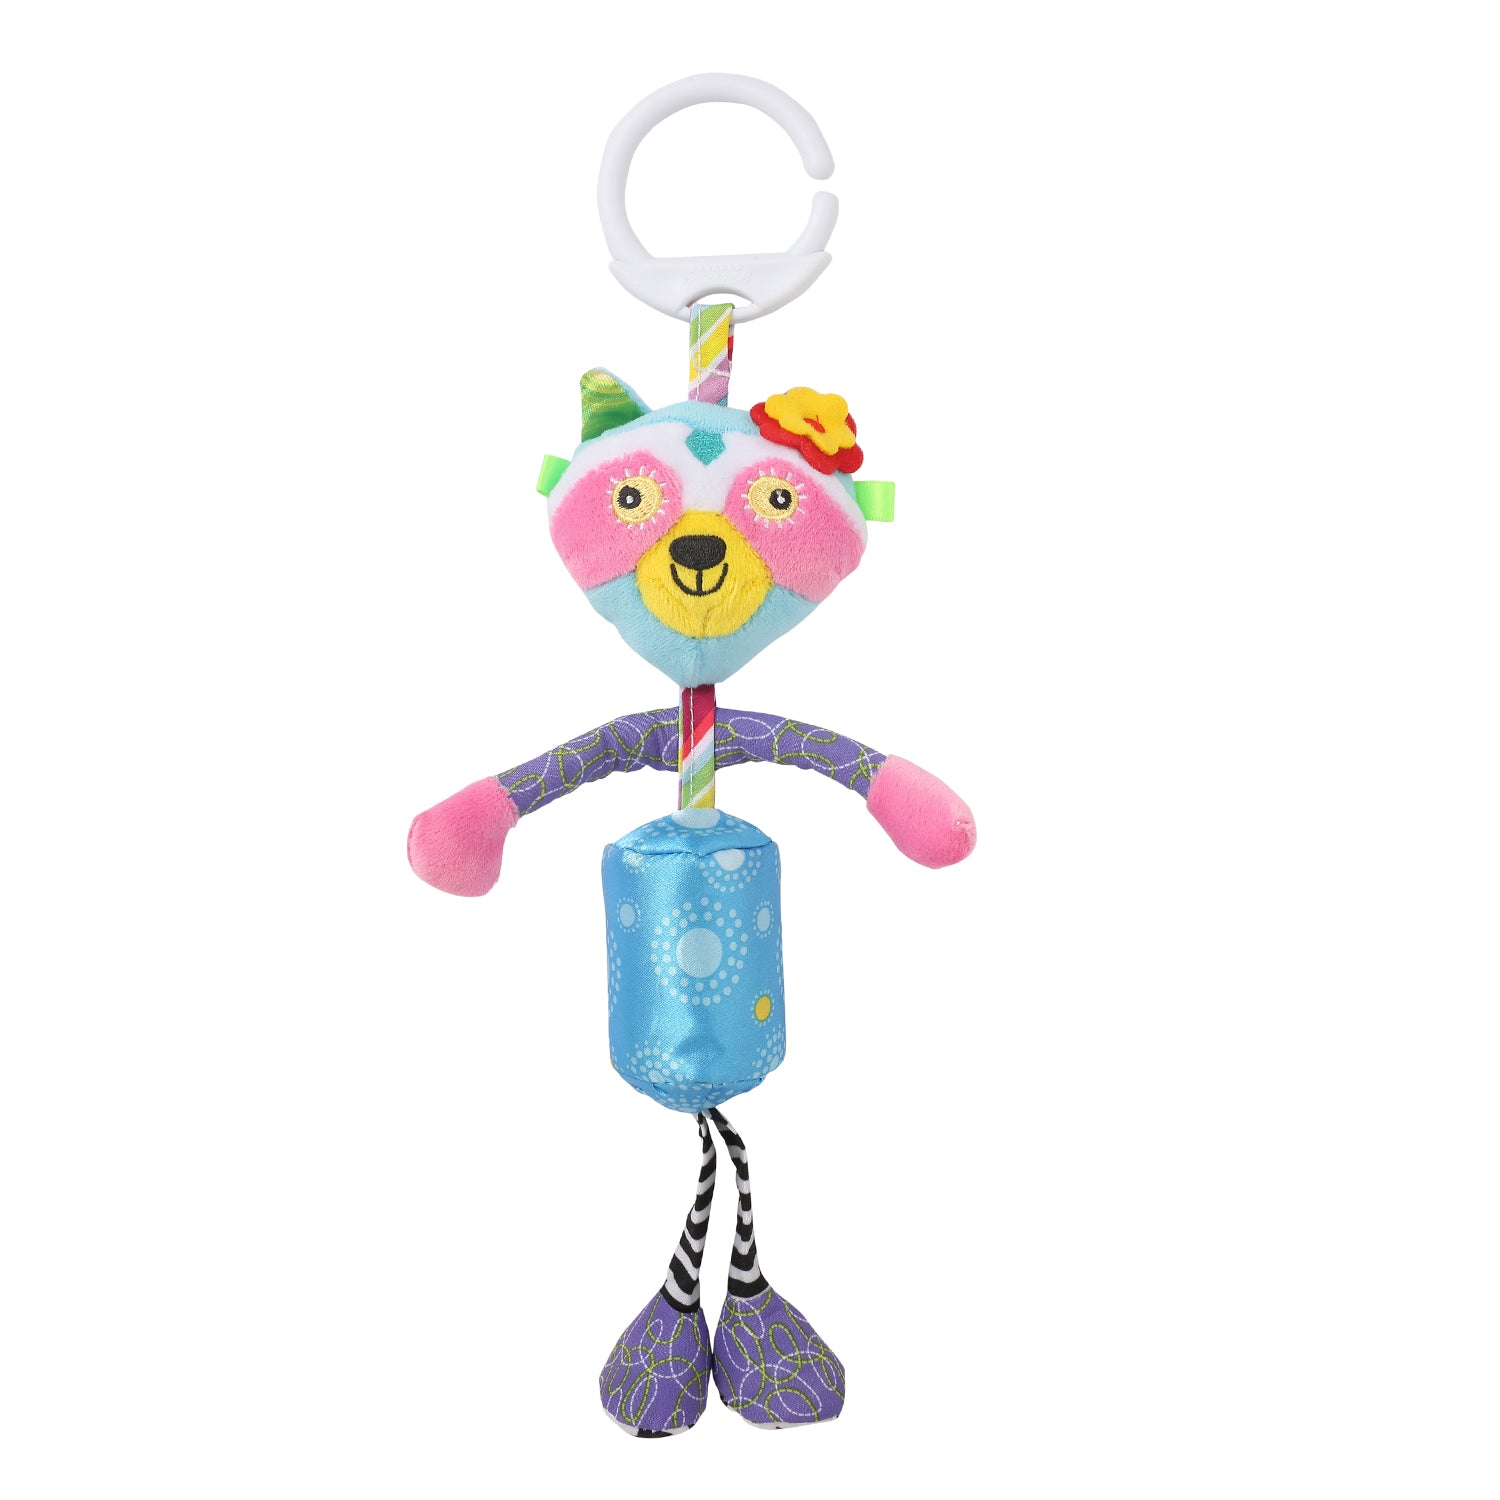 My Best Friend Pink And Blue Hanging Musical Toy / Wind Chime Soft Rattle - Baby Moo